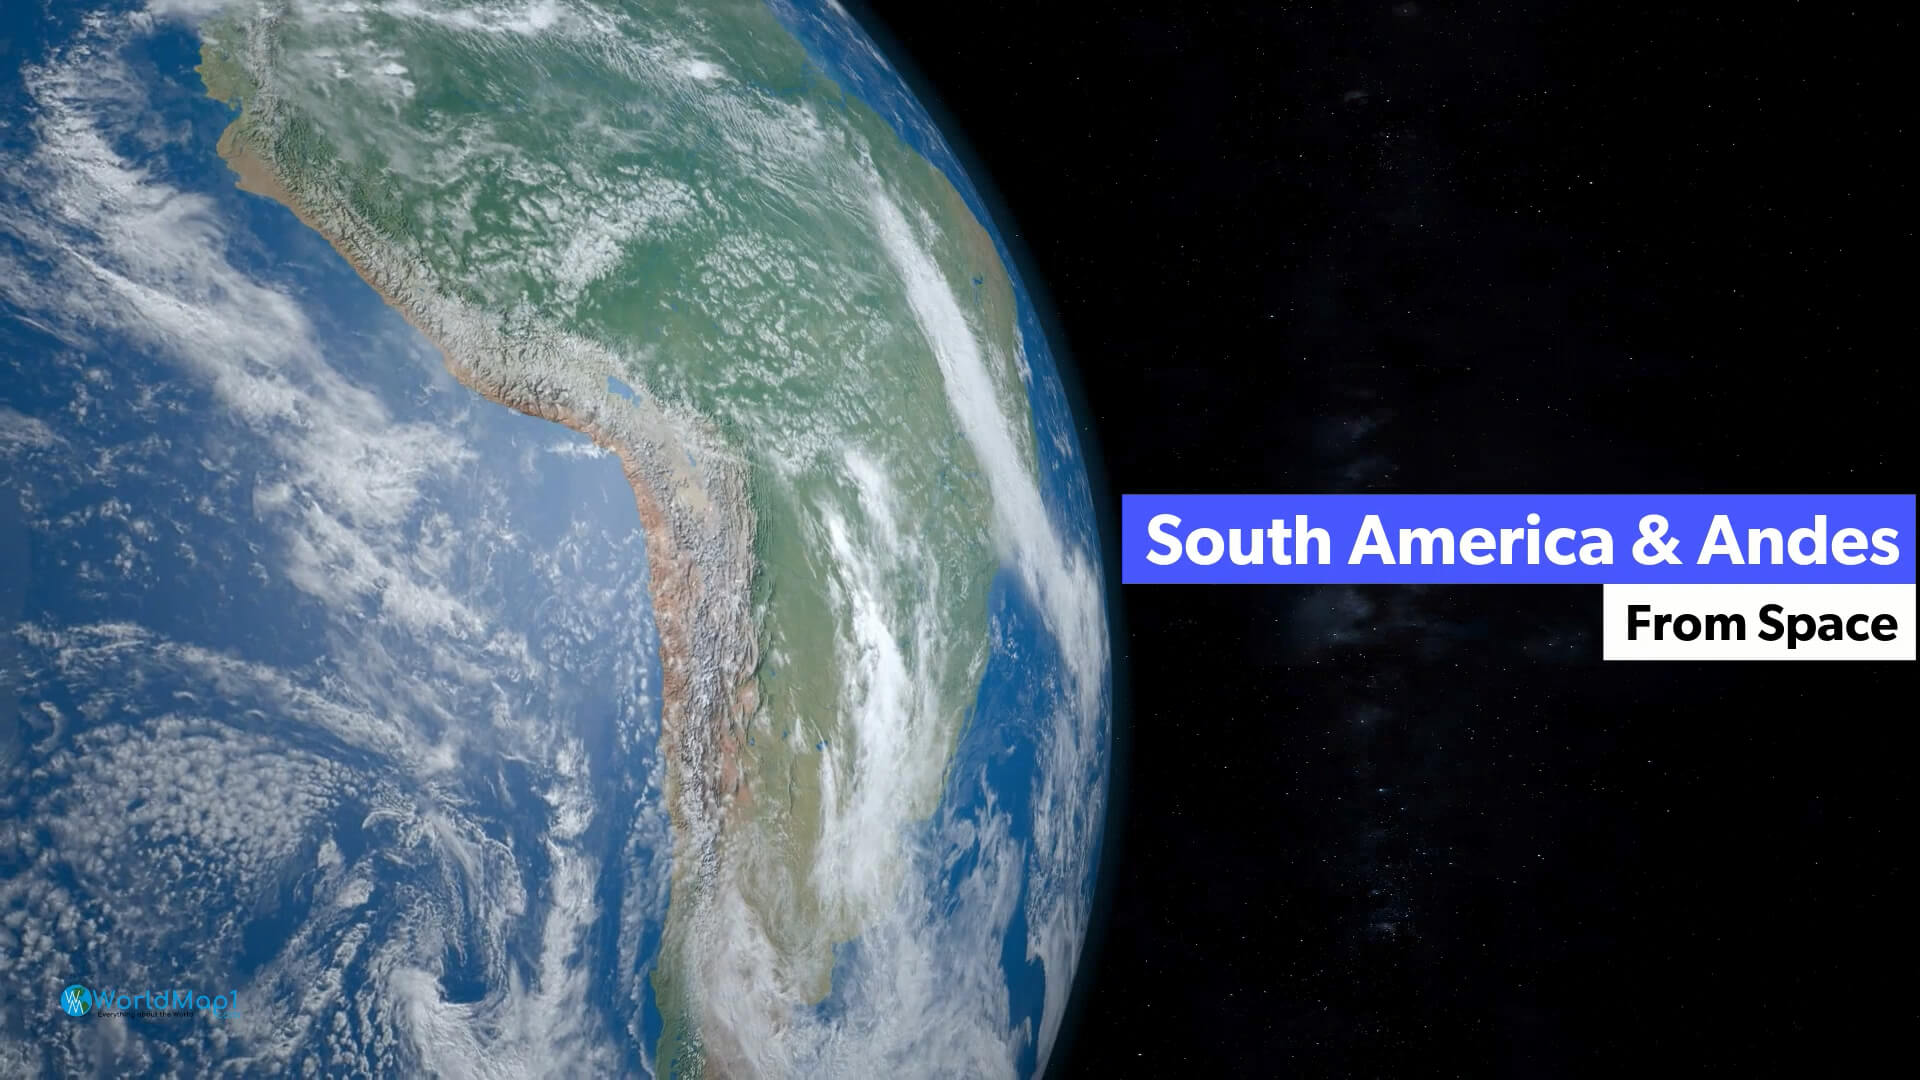 South America and Andes from Space